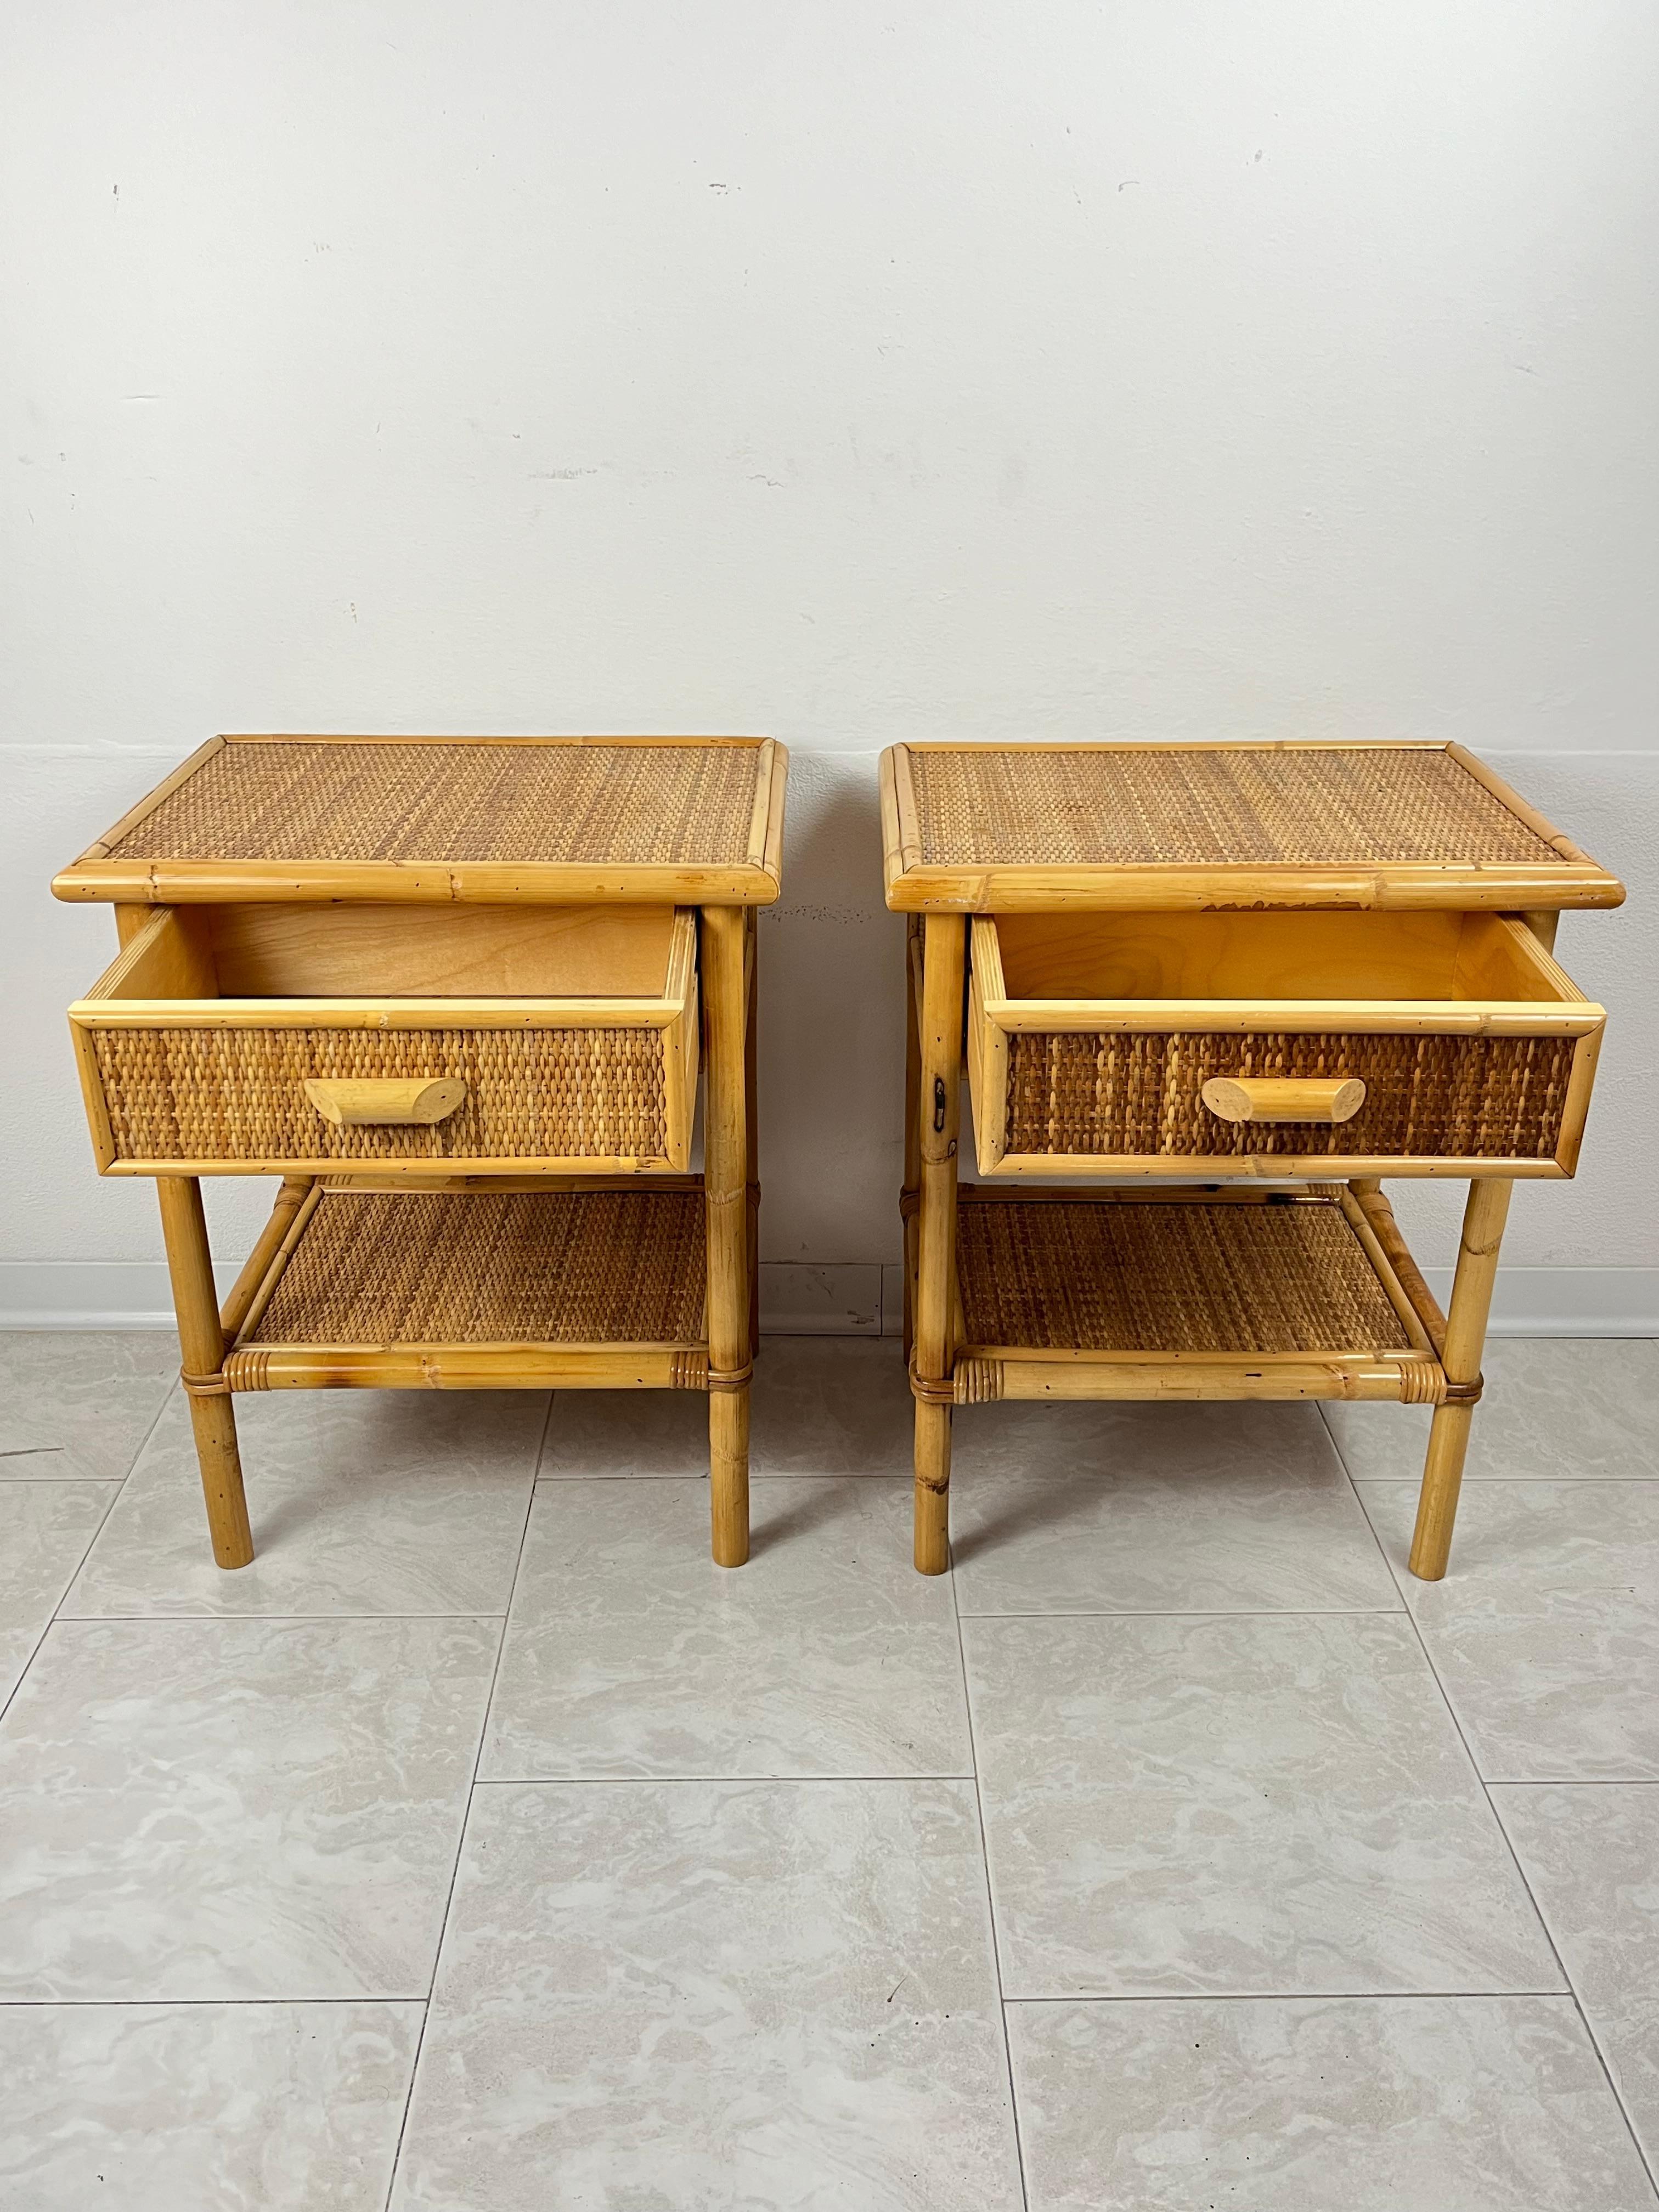 Pair of rattan and bamboo bedside tables, Mid-Century Italian design
Intact and in good condition.